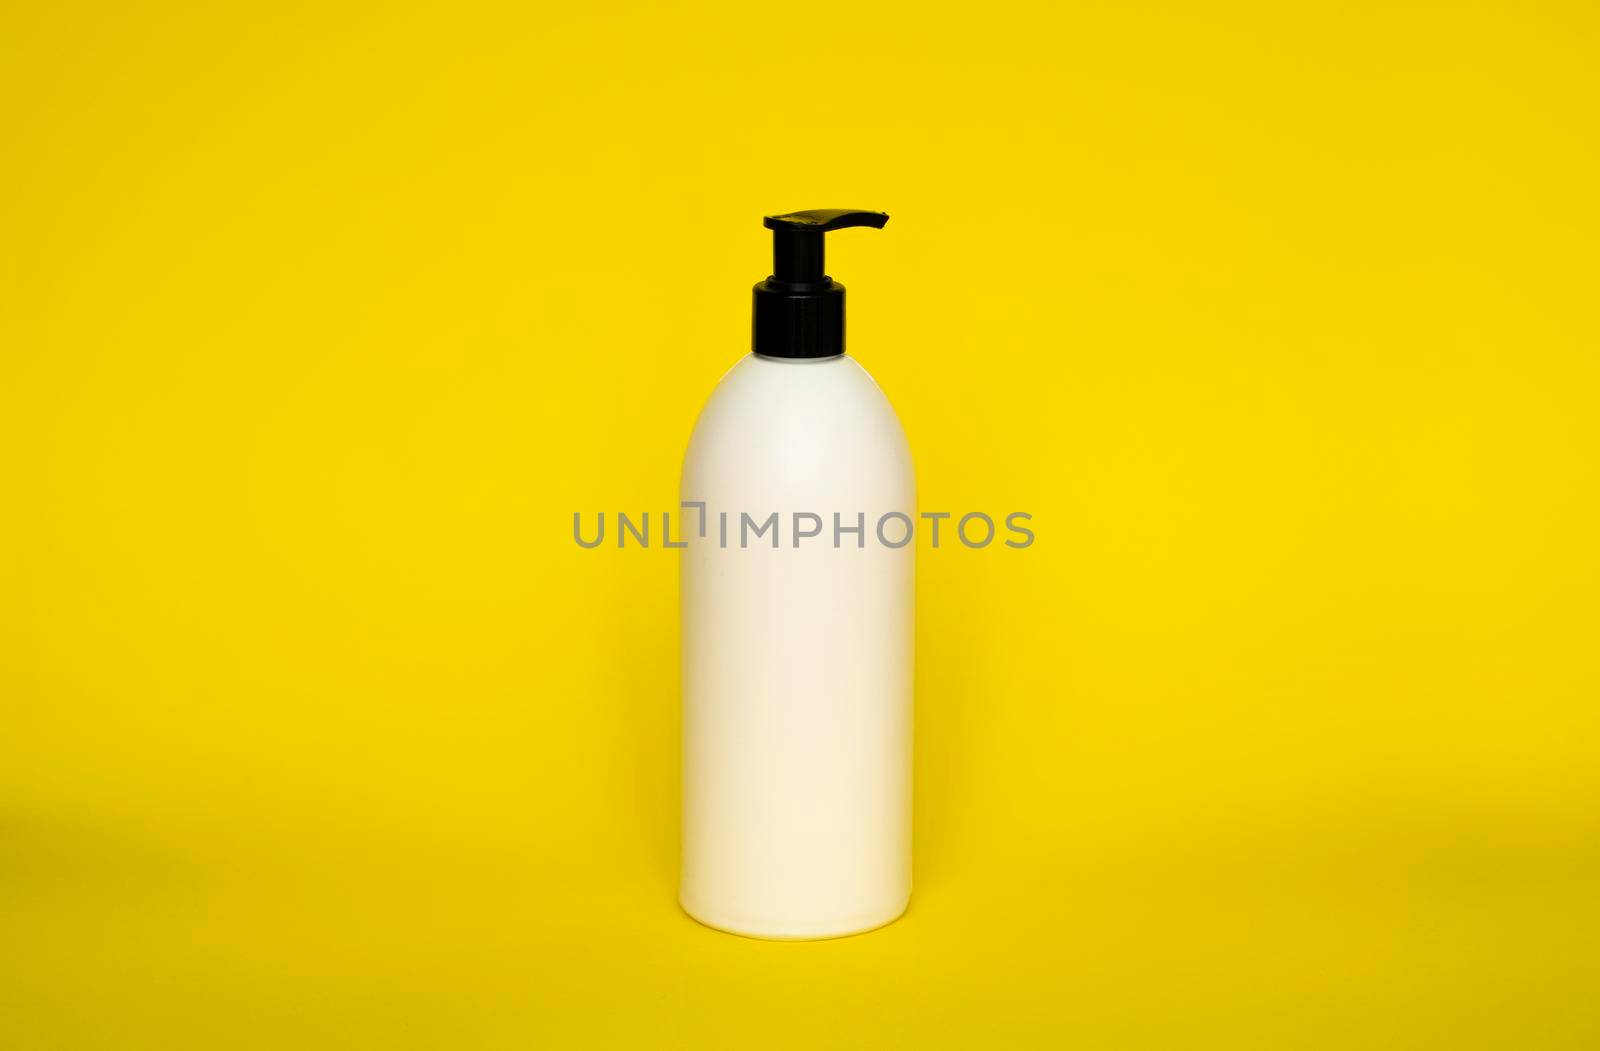 Large white plastic bottle with pump dispenser on yellow background. Mock up template for design